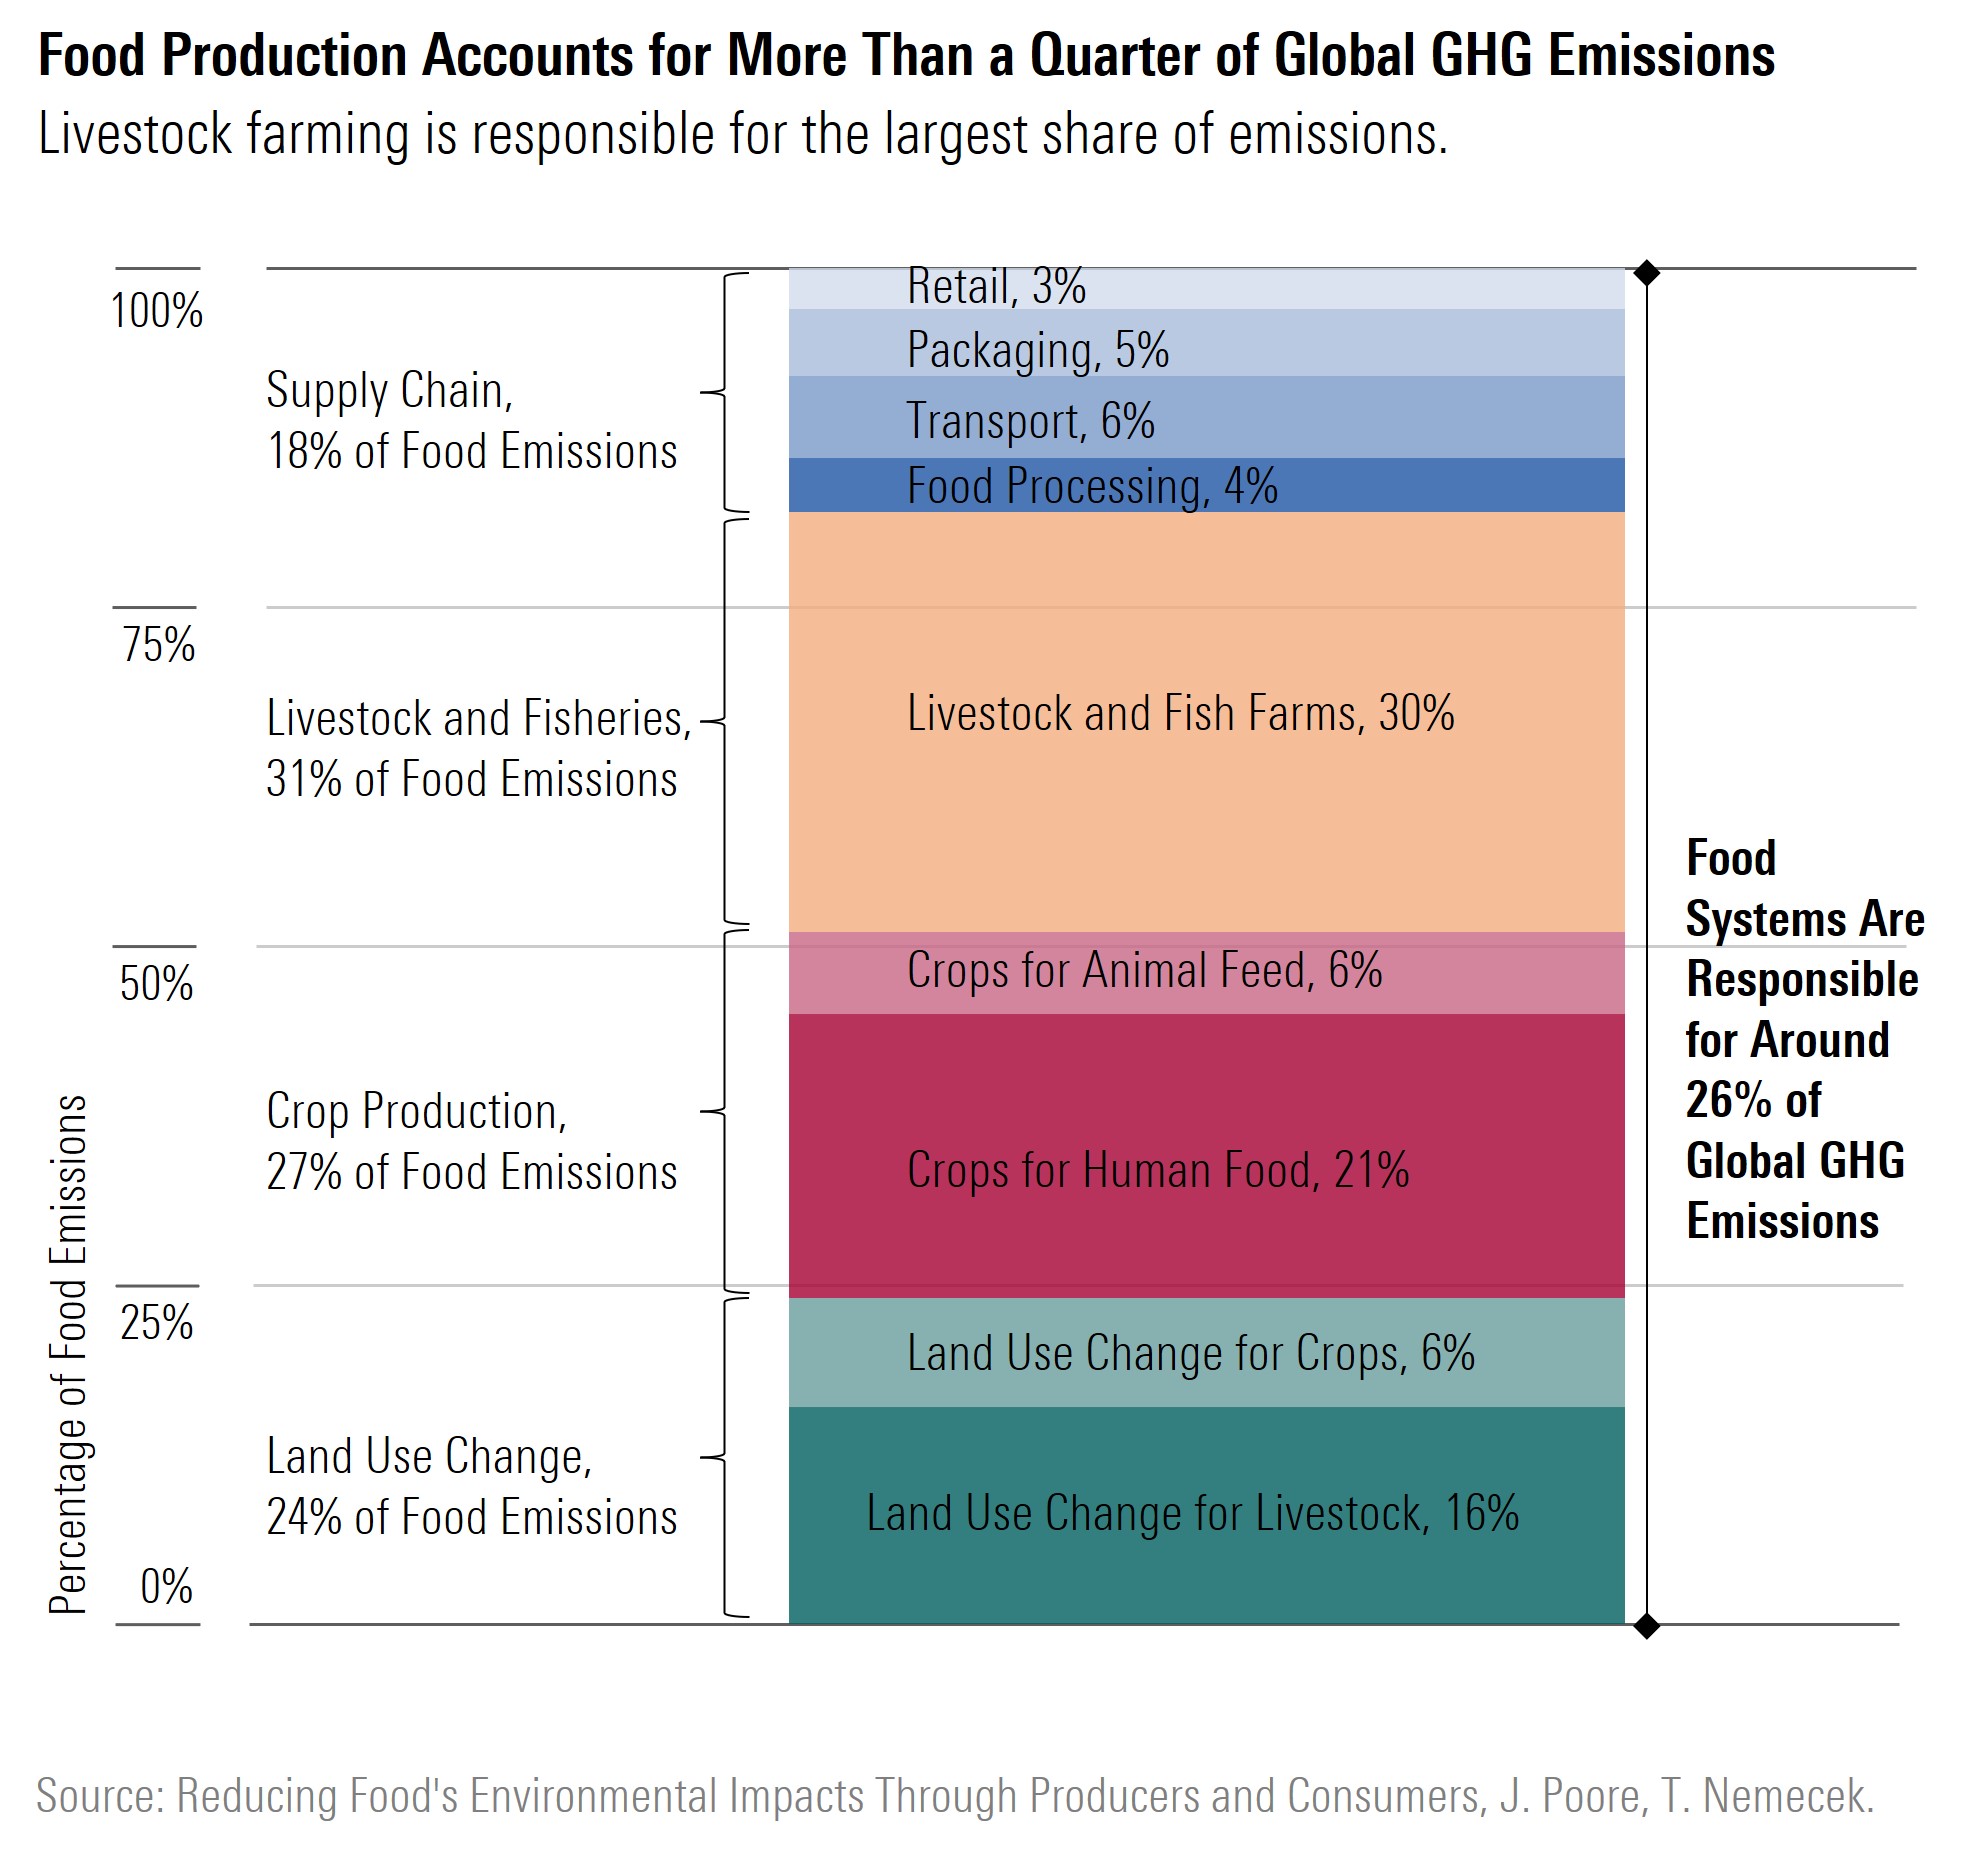 Food production, and especially livestock farming, is responsible for more than a quarter of global greenhouse gas emissions.